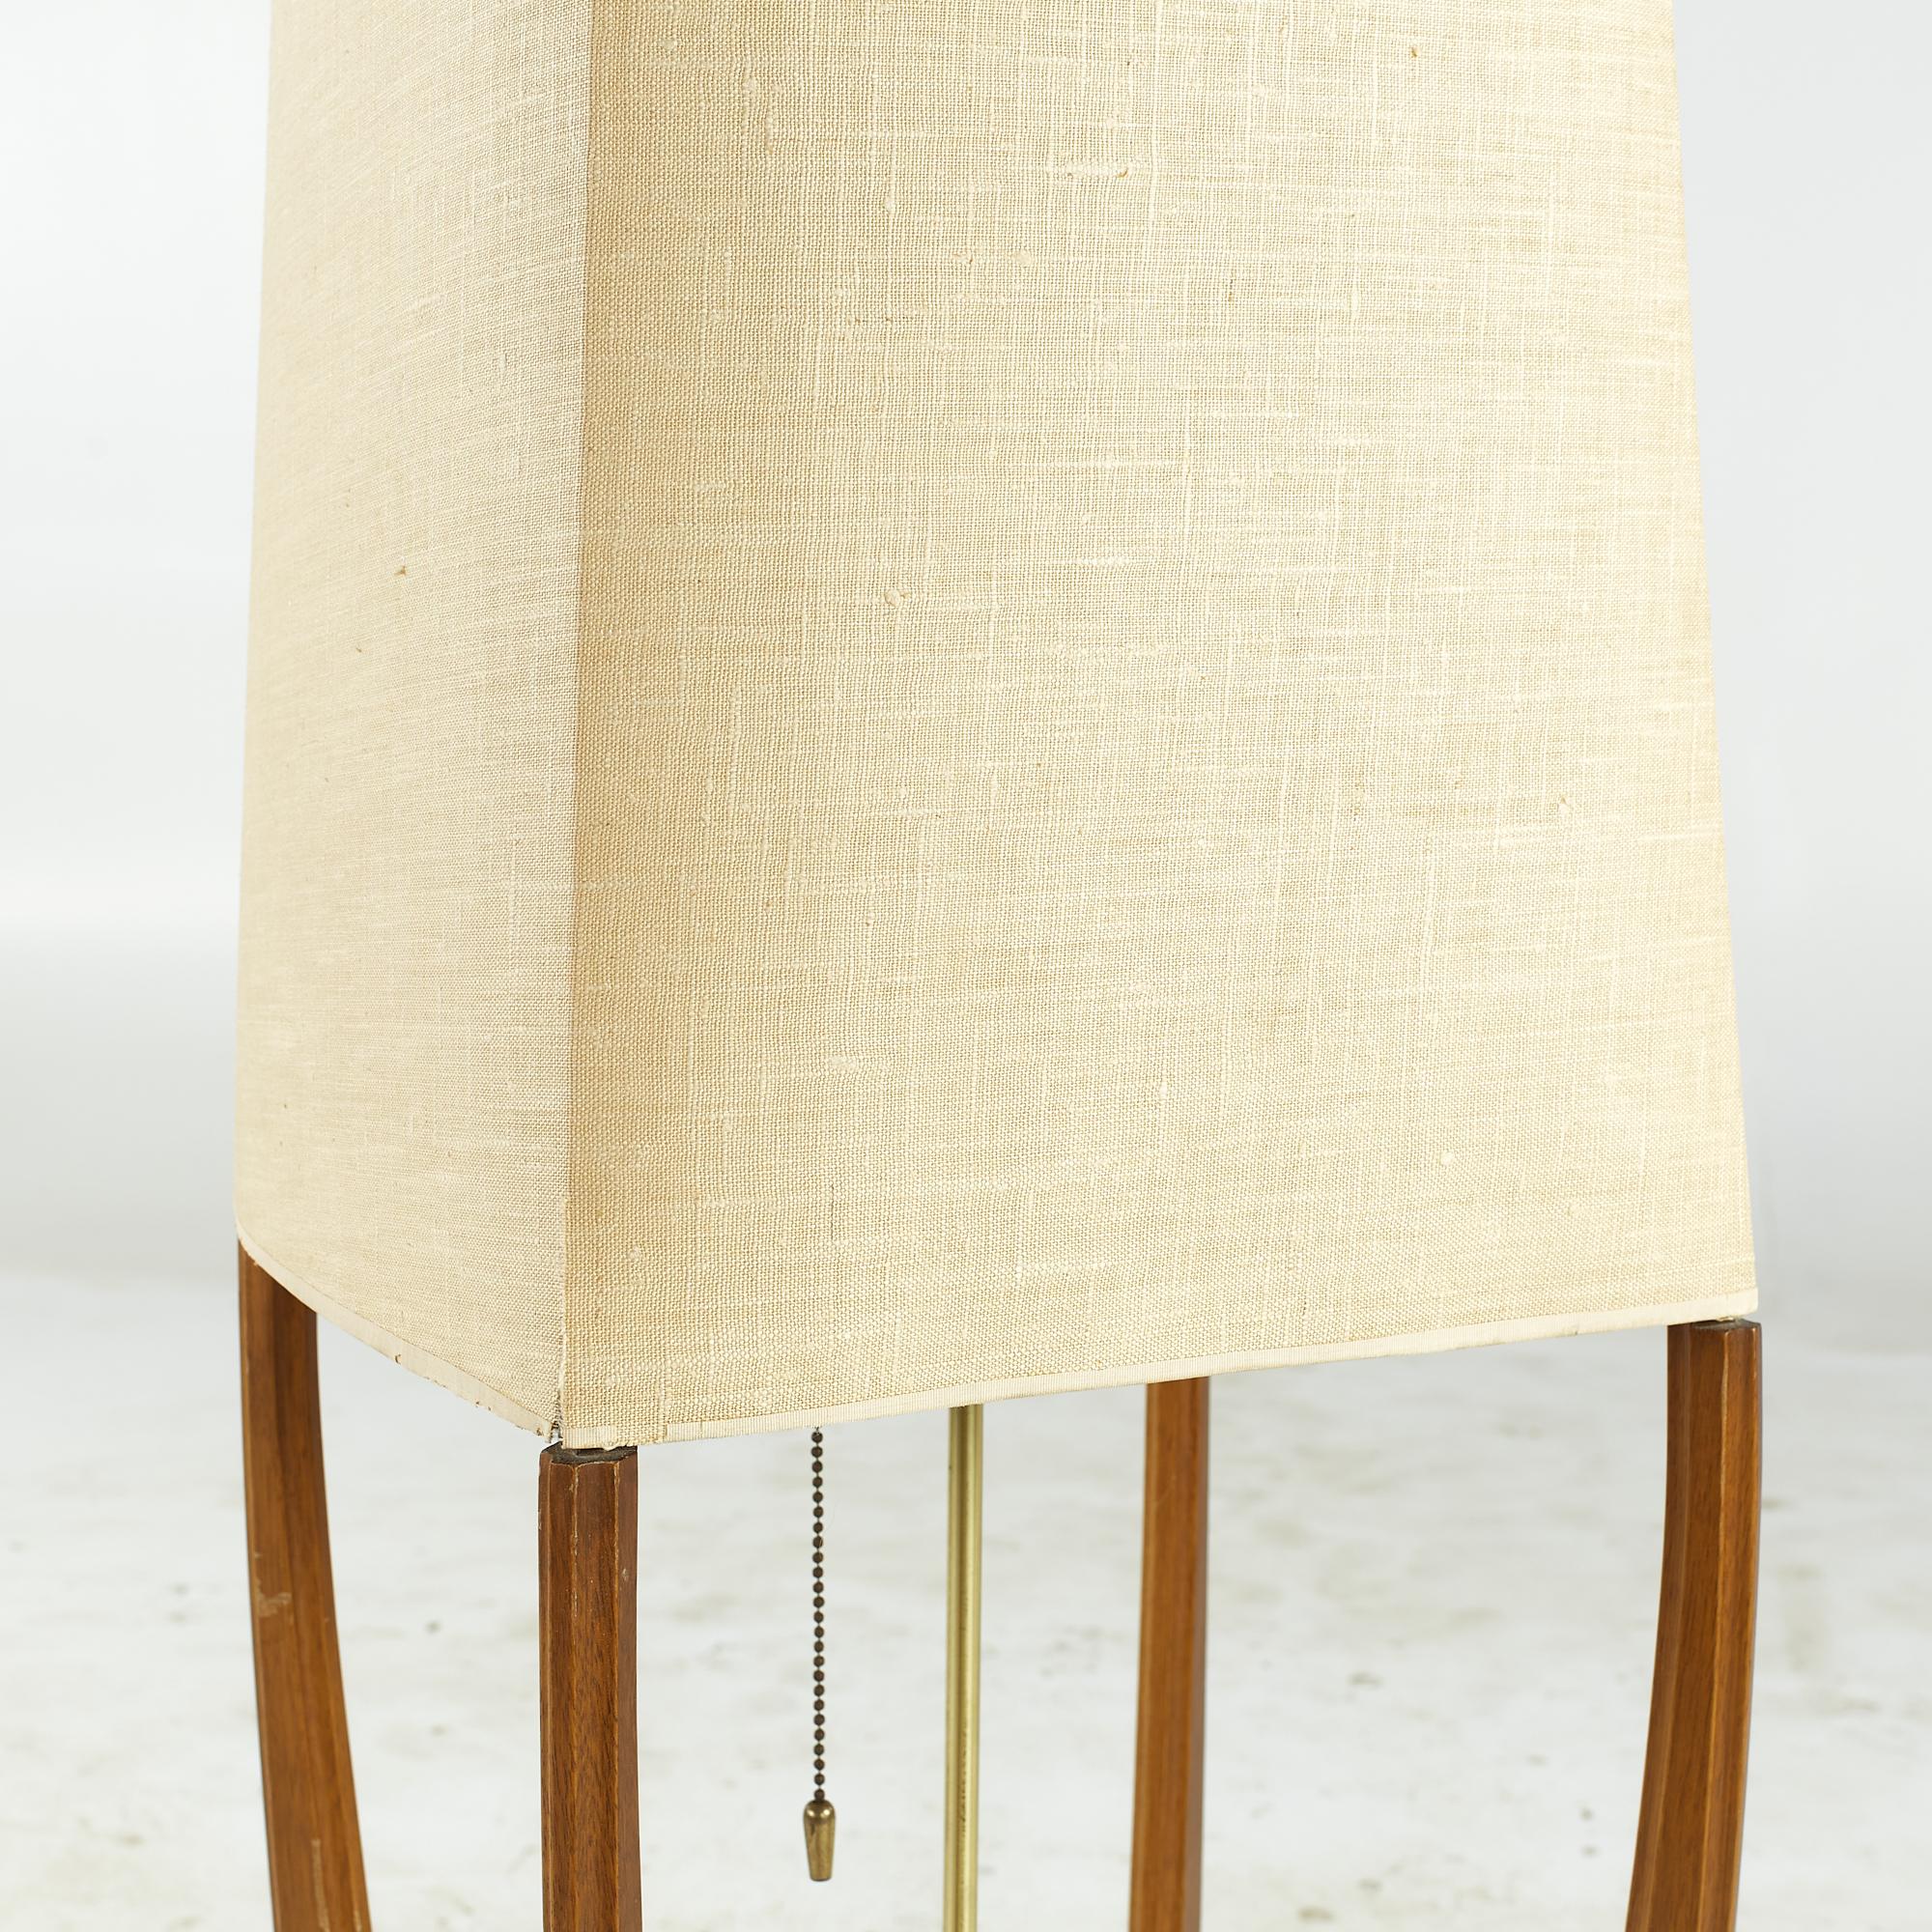 Modeline Style Midcentury Walnut and Brass Floor Lamp For Sale 3